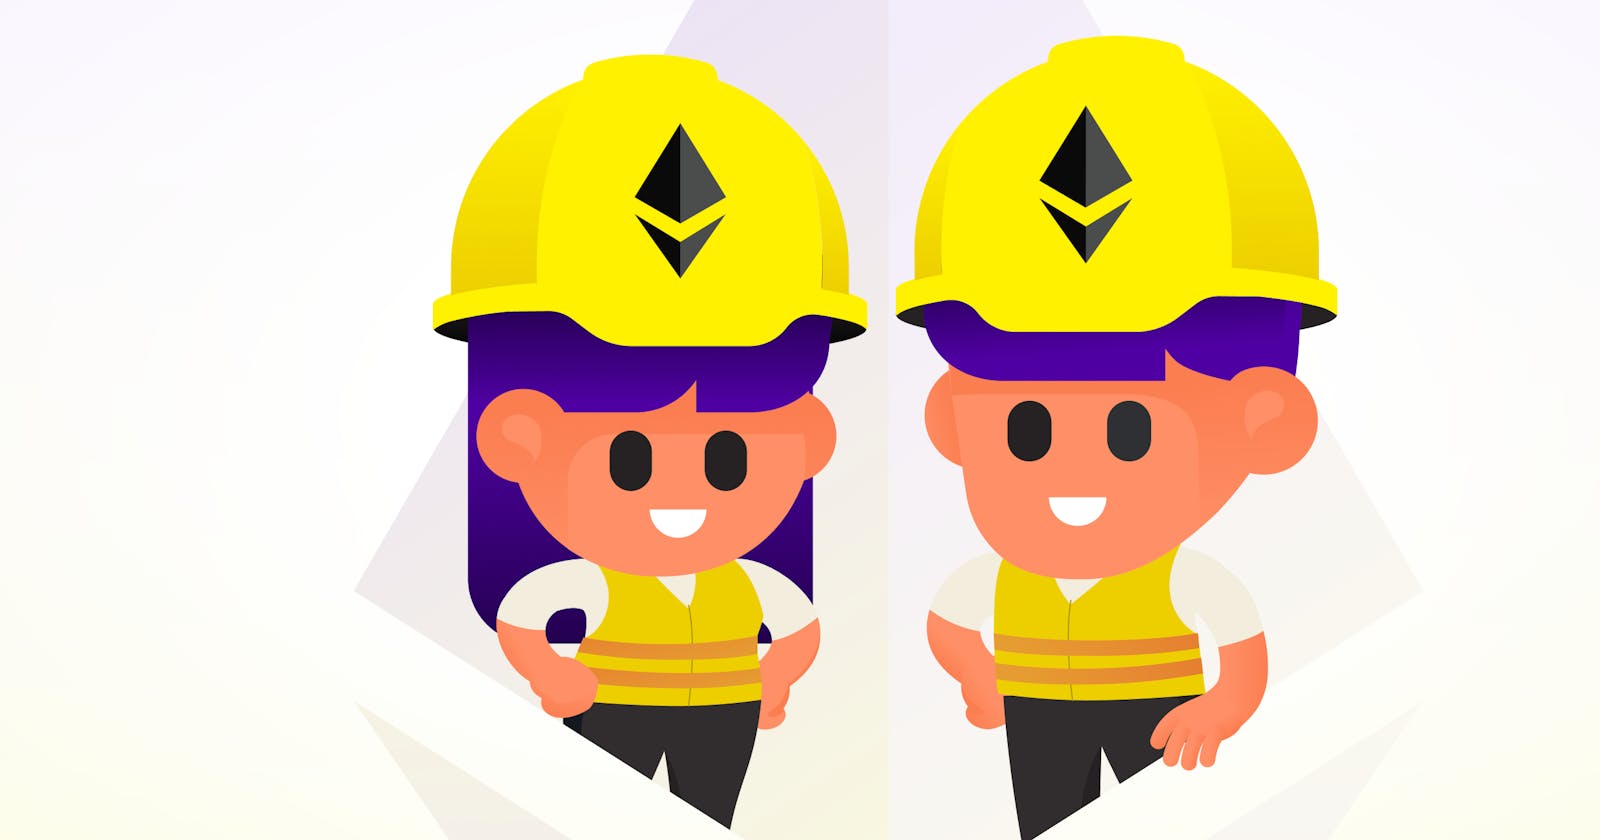 How to write your first Ethereum smart contract with Hardhat and Connect a wallet to Hardhat Network